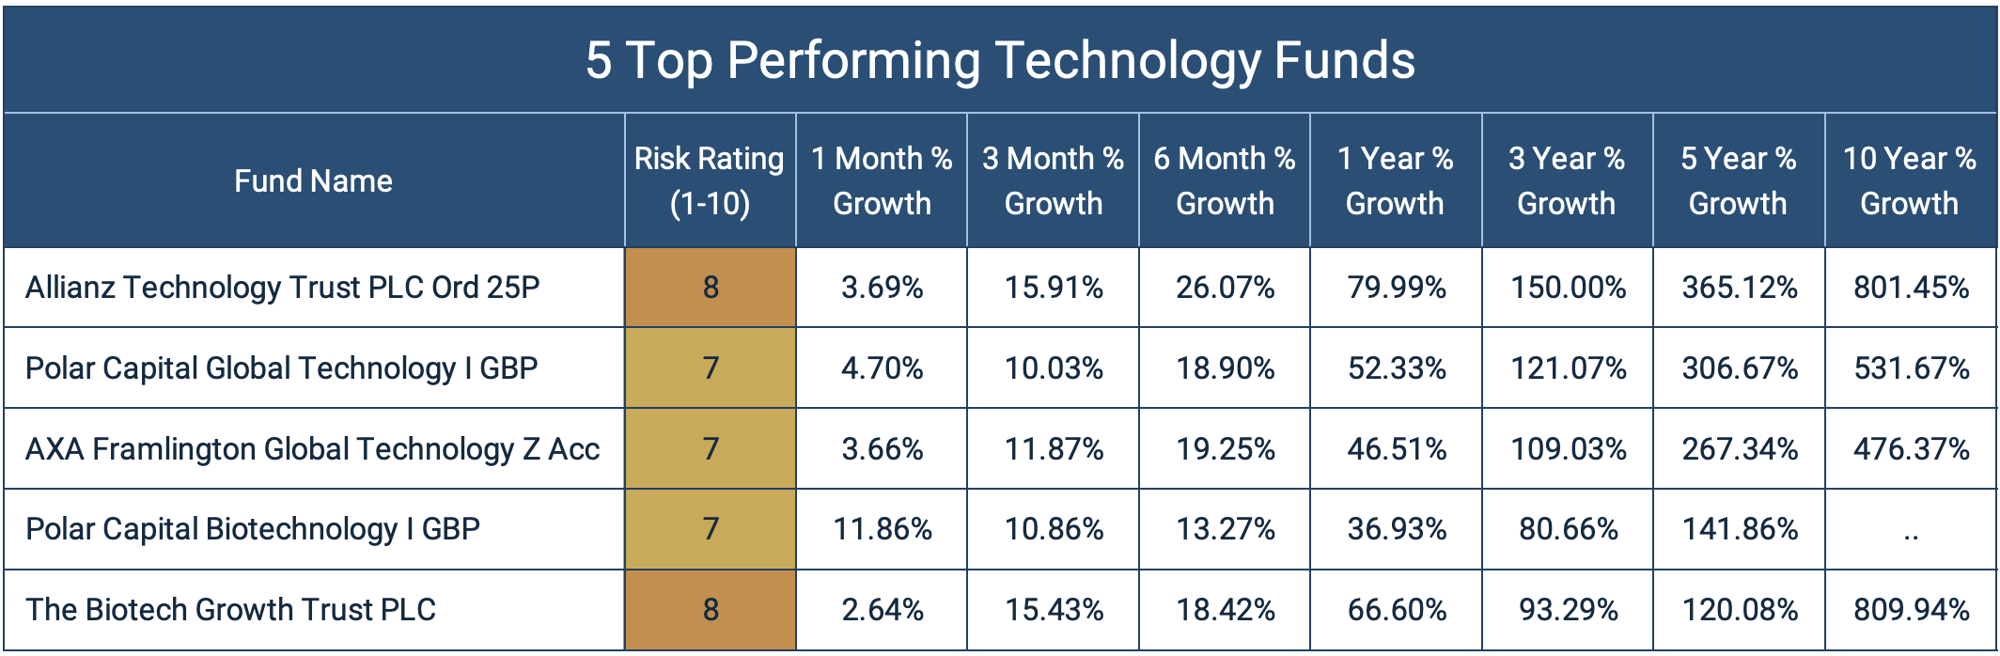 Will Technology Funds Continue To Thrive in 2021? The 5 Top Performing